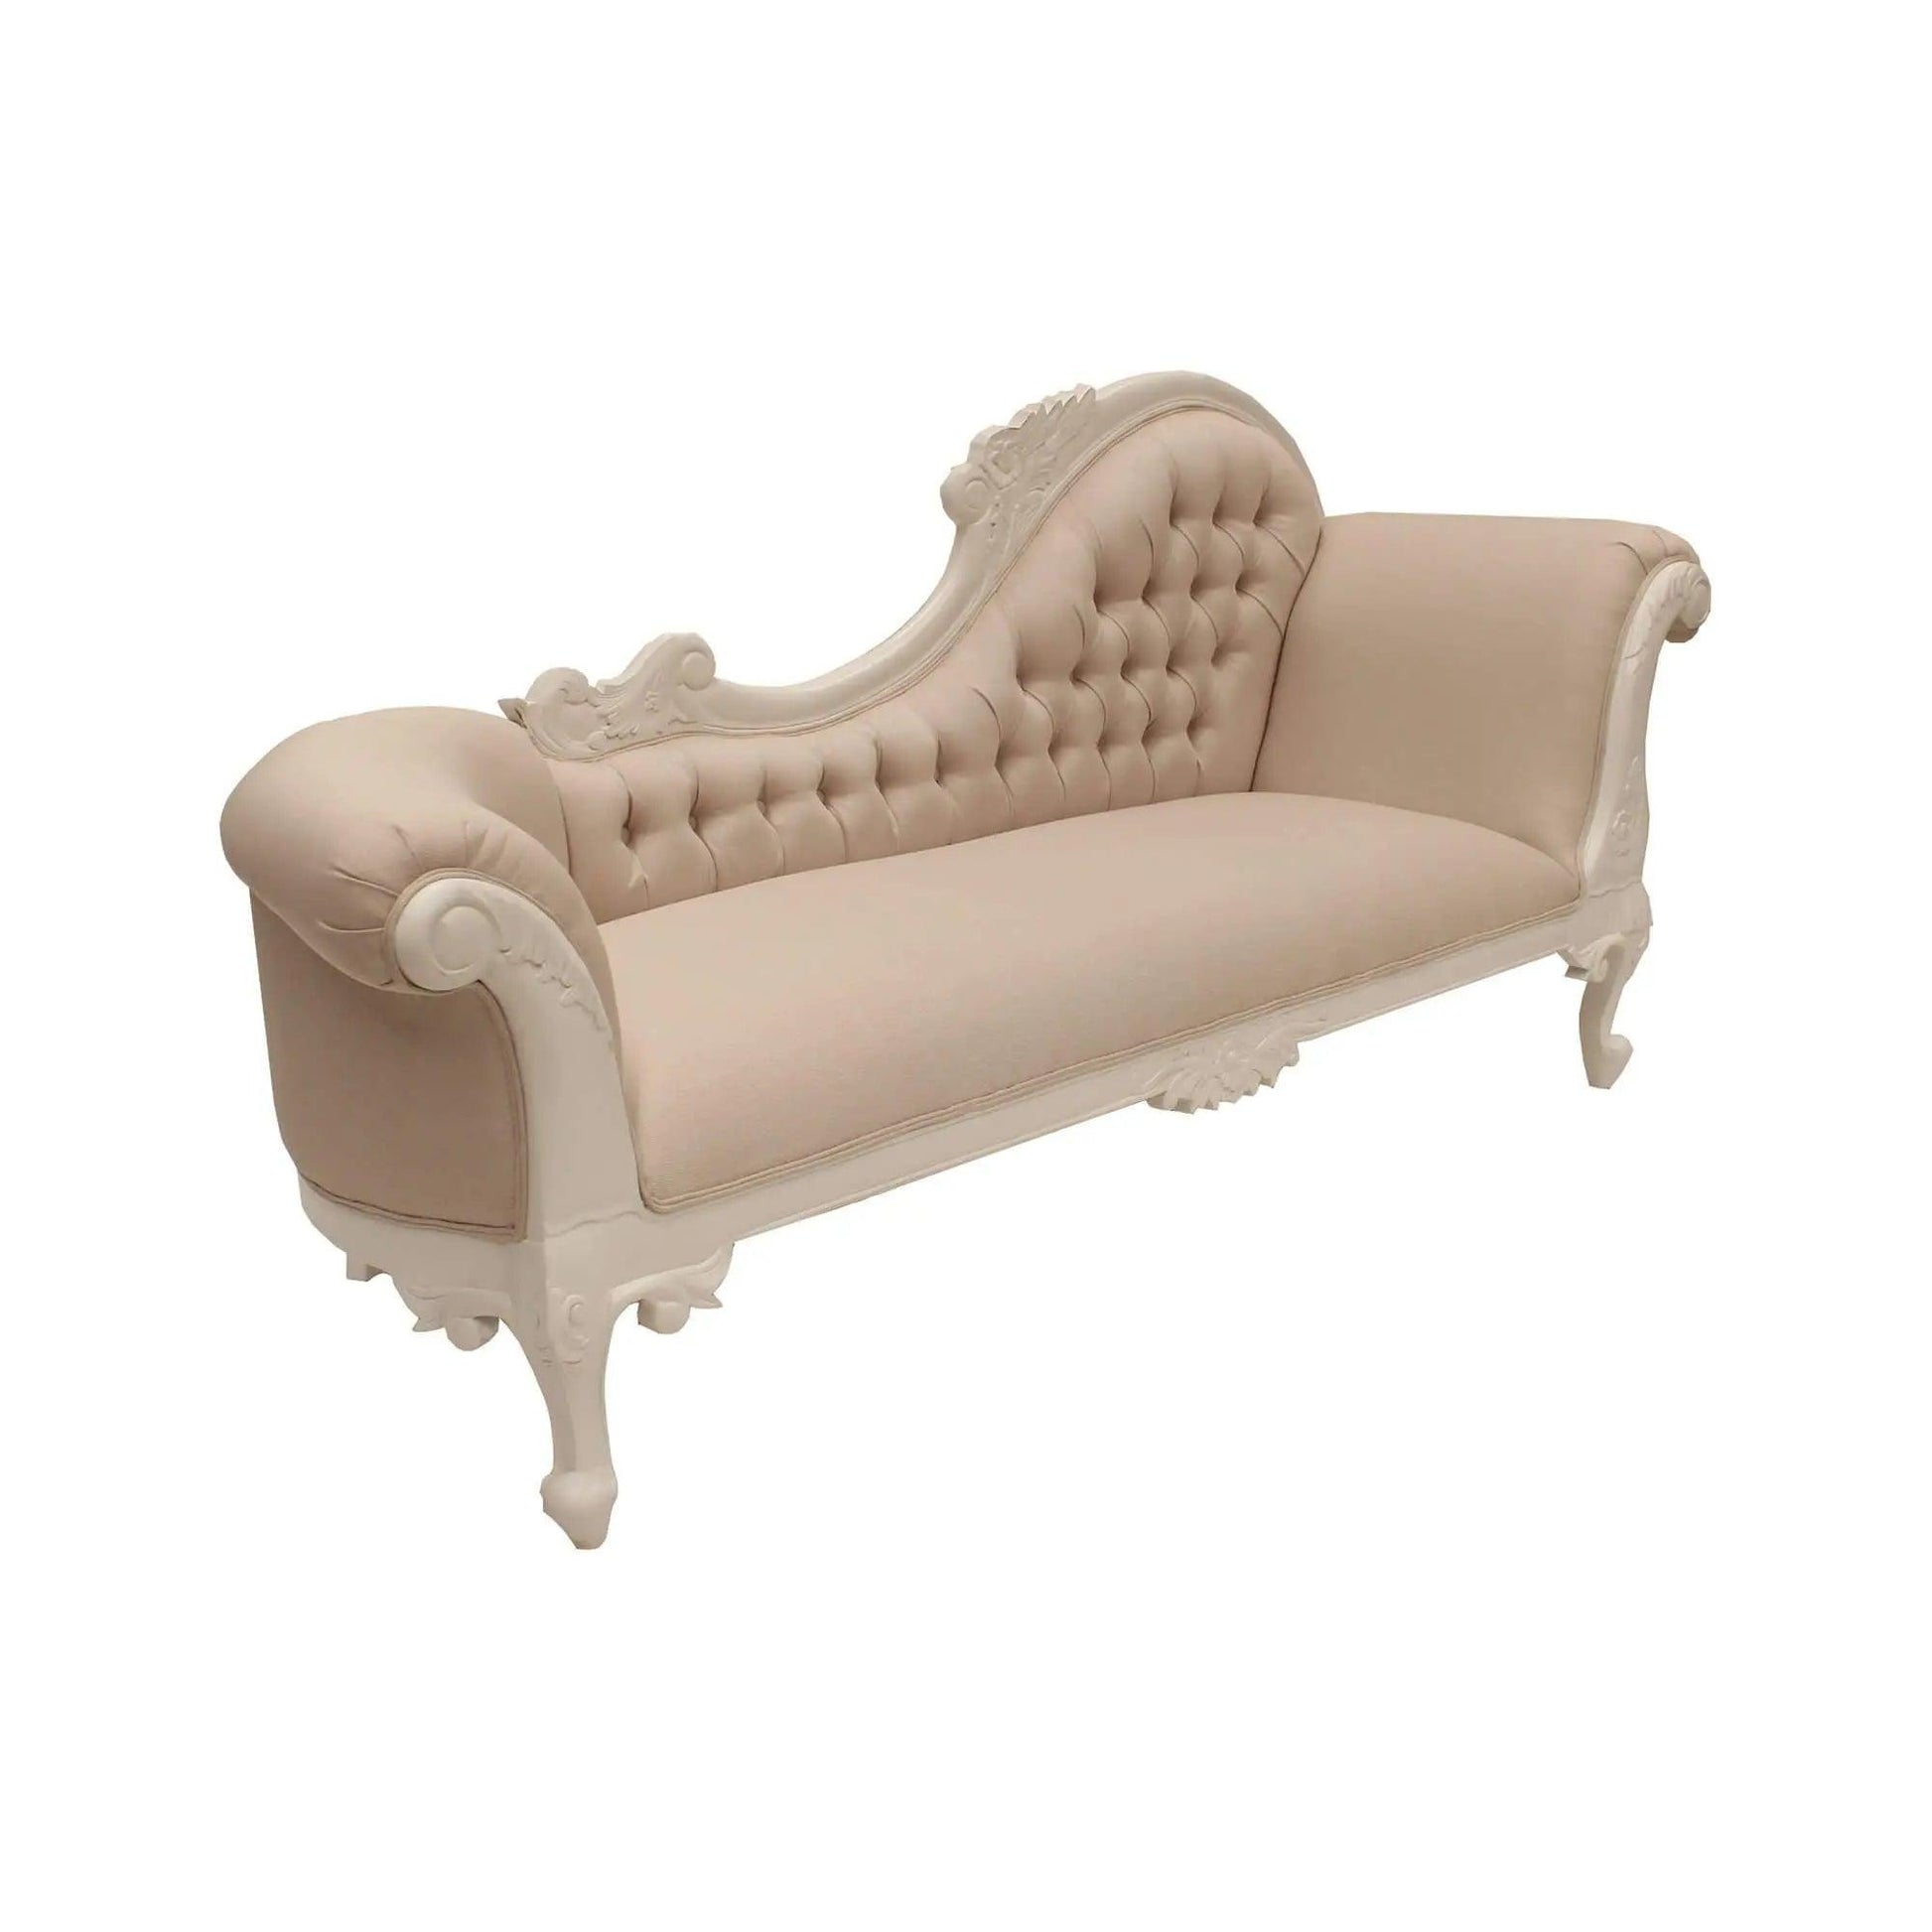 Right Side High Large Carved Chaise Lounge - SofasMCHA108RPDR9360245001004 8